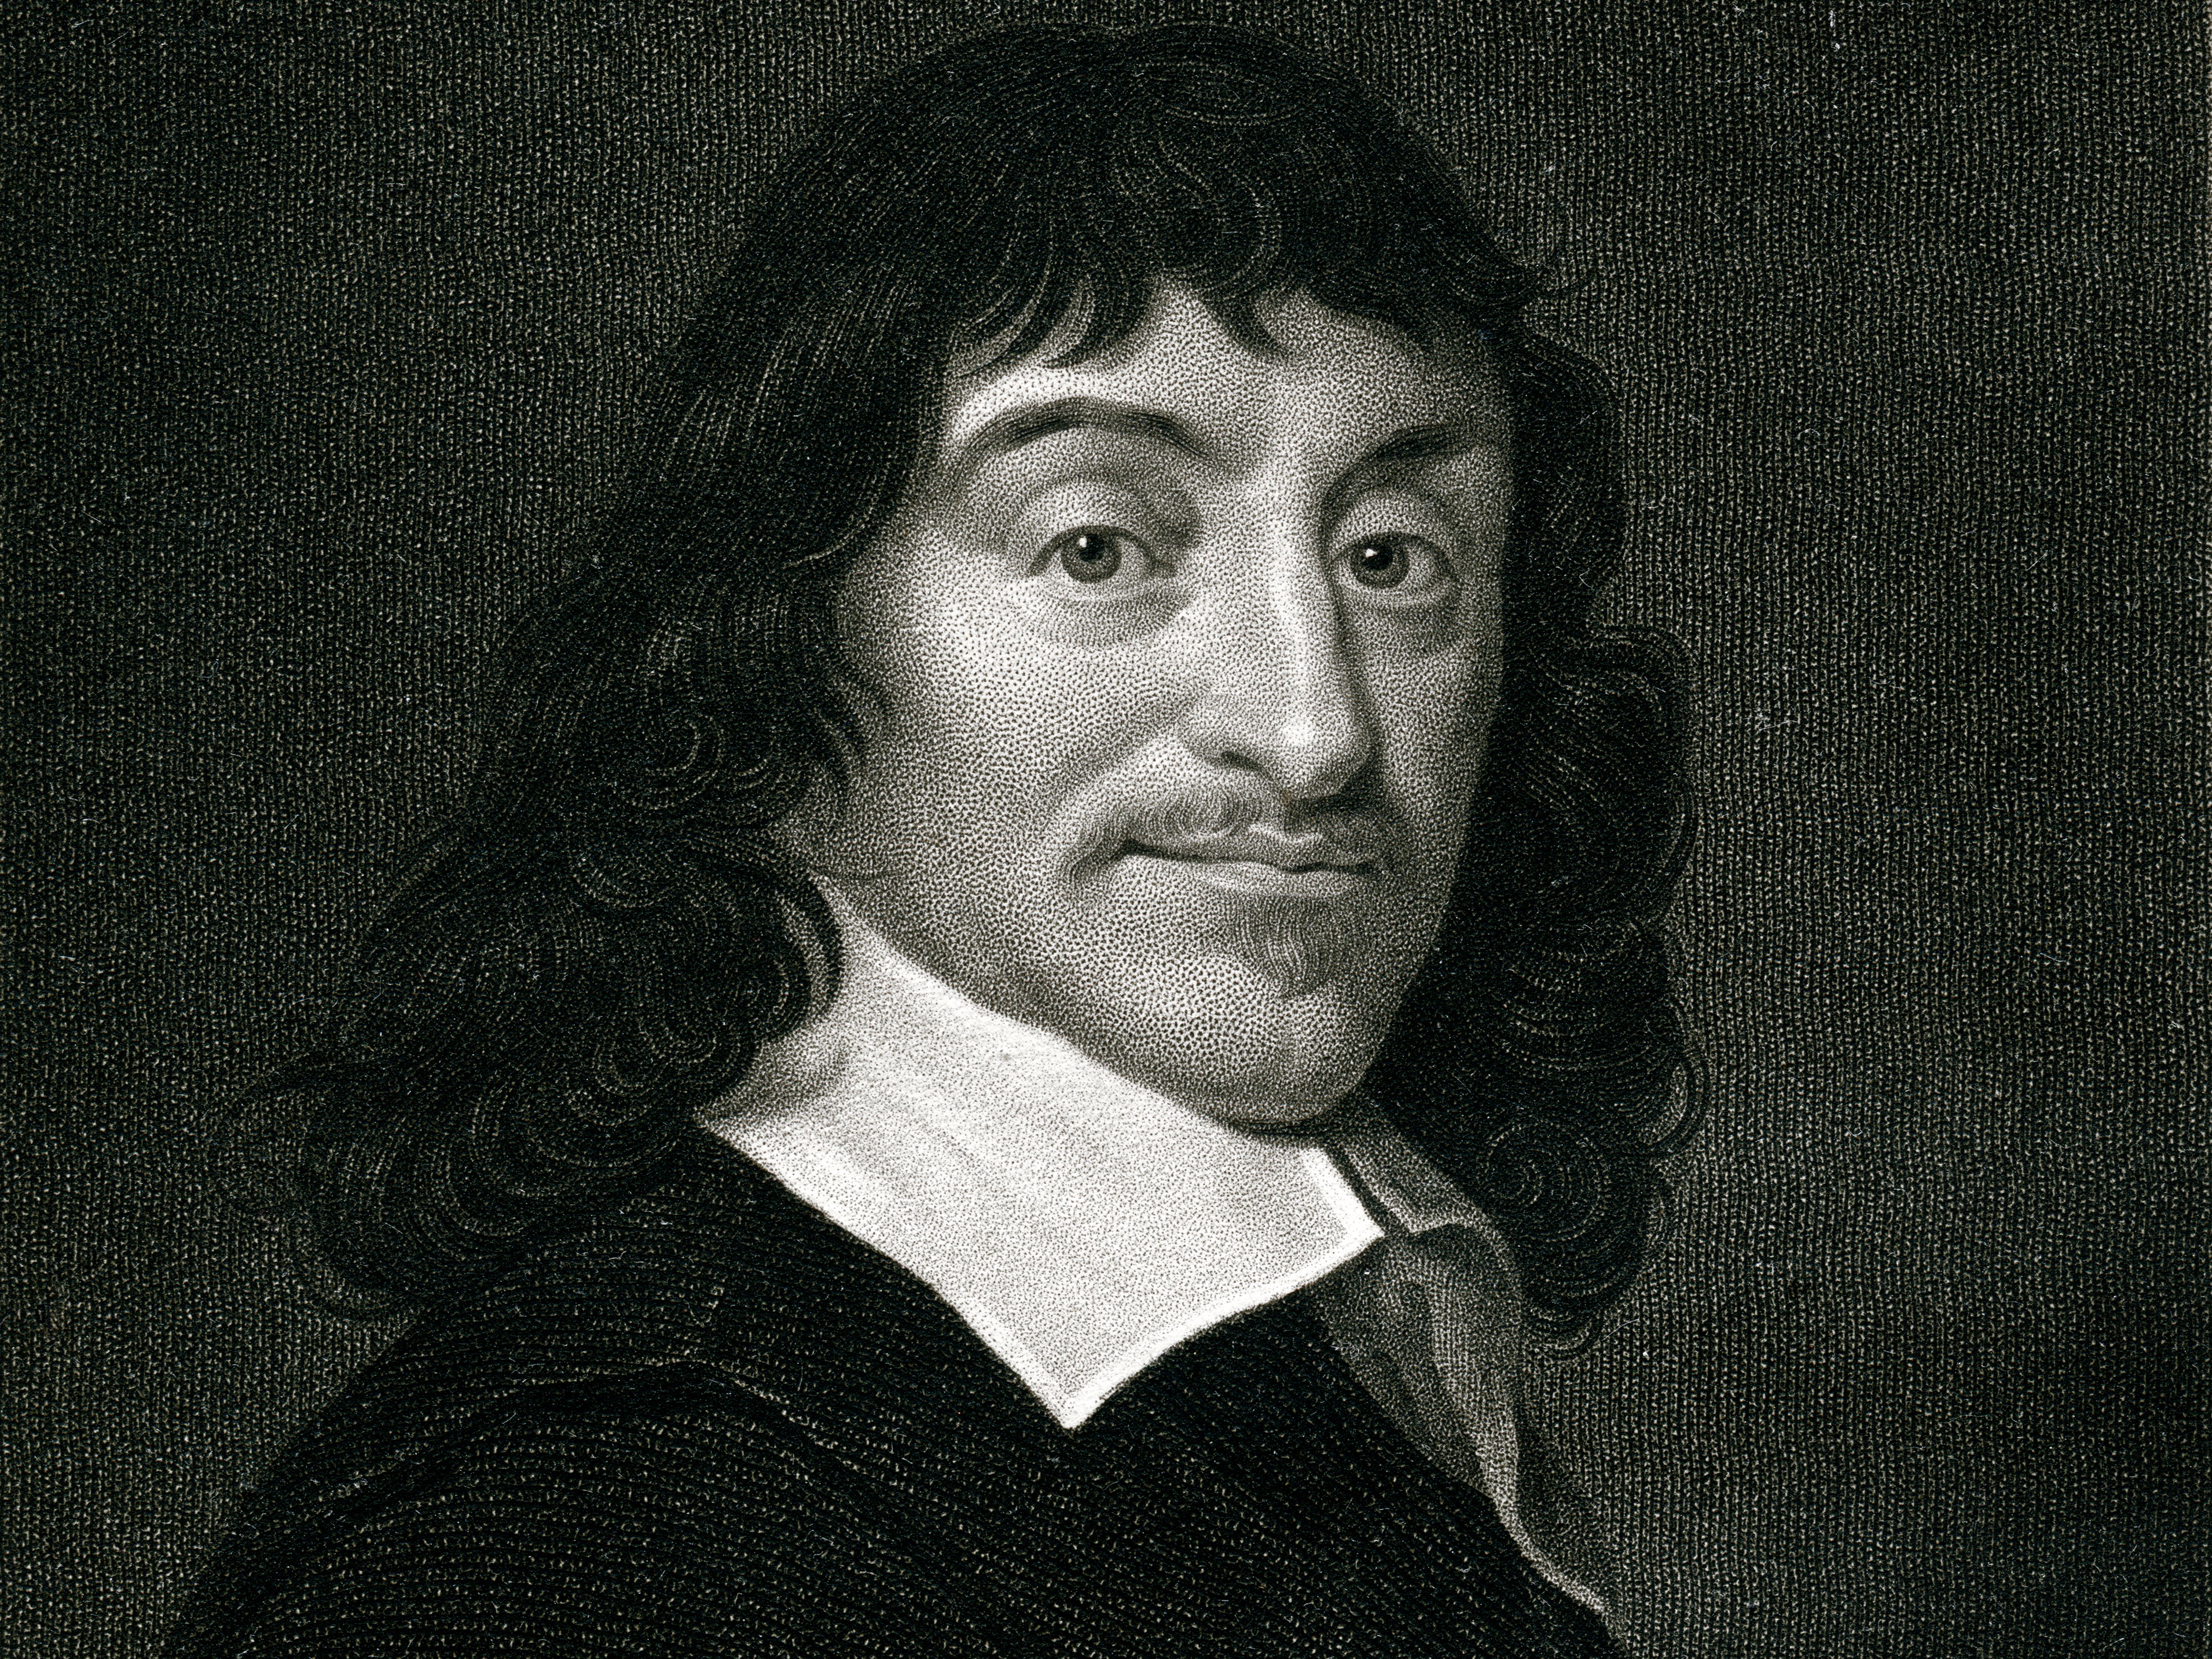 Descartes used methods learned from maths in his philosophical works